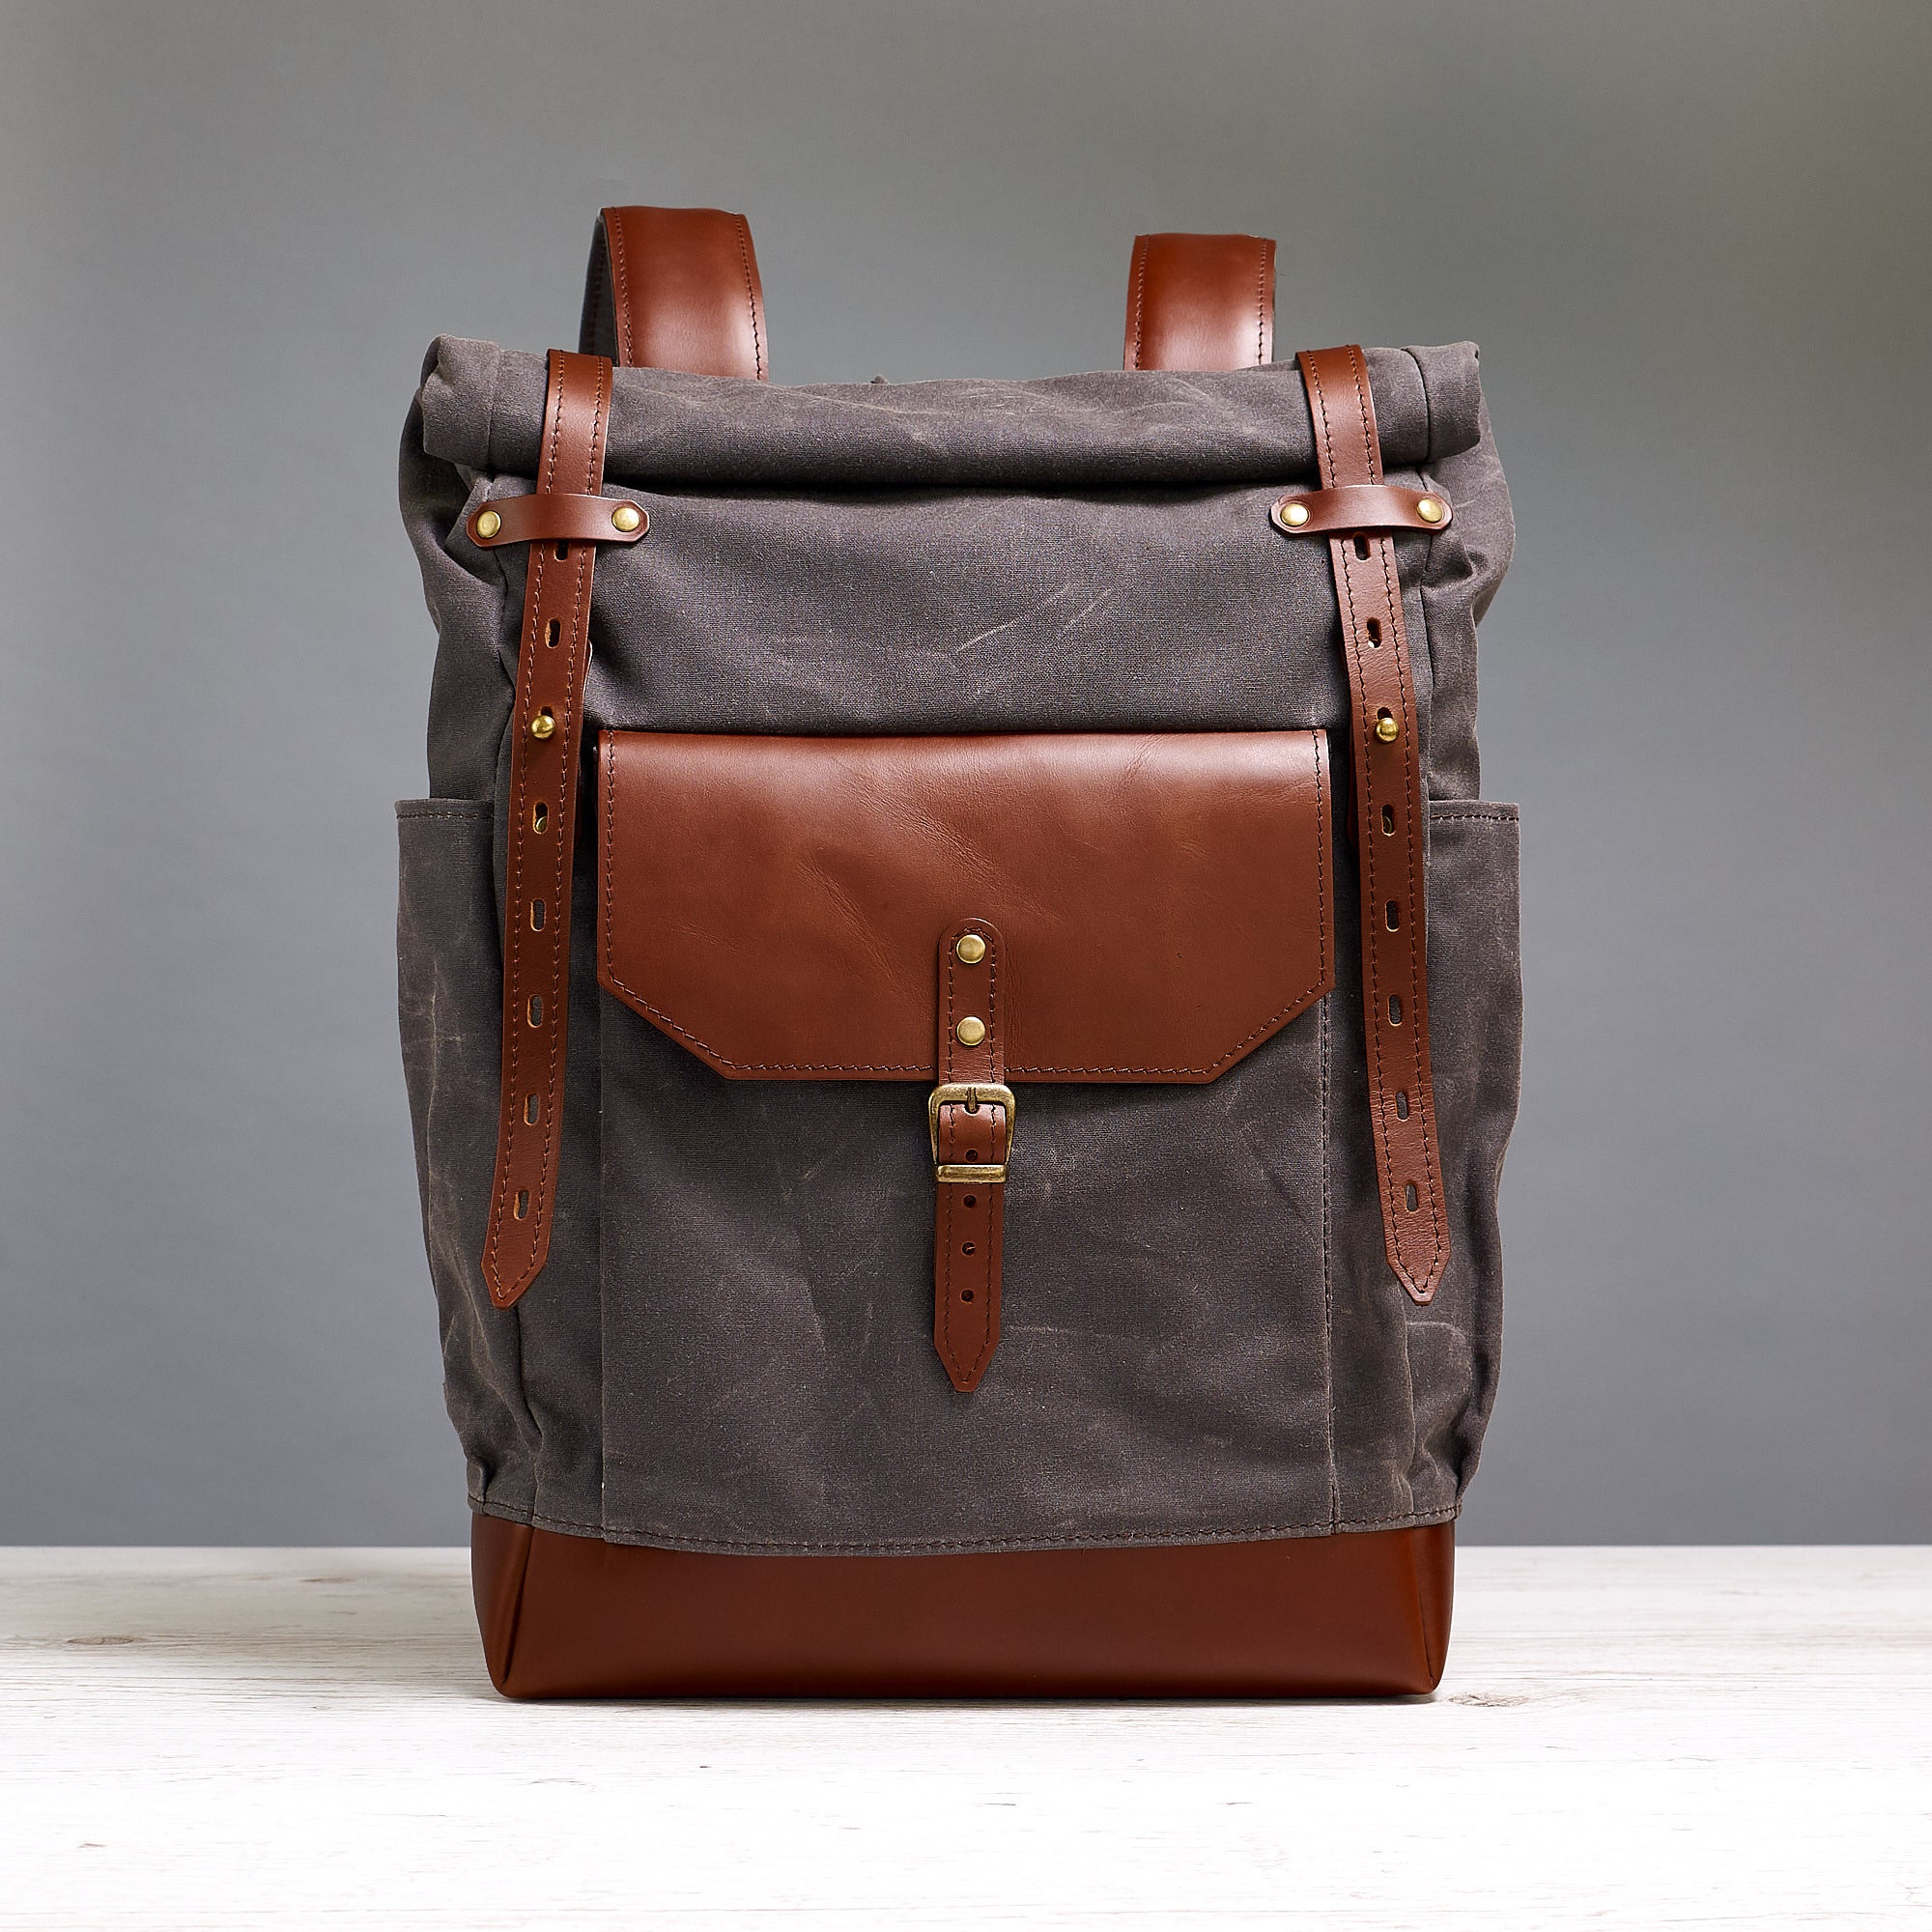 Roll top canvas backpack for 15 inch laptop. Dark chocolate colour.